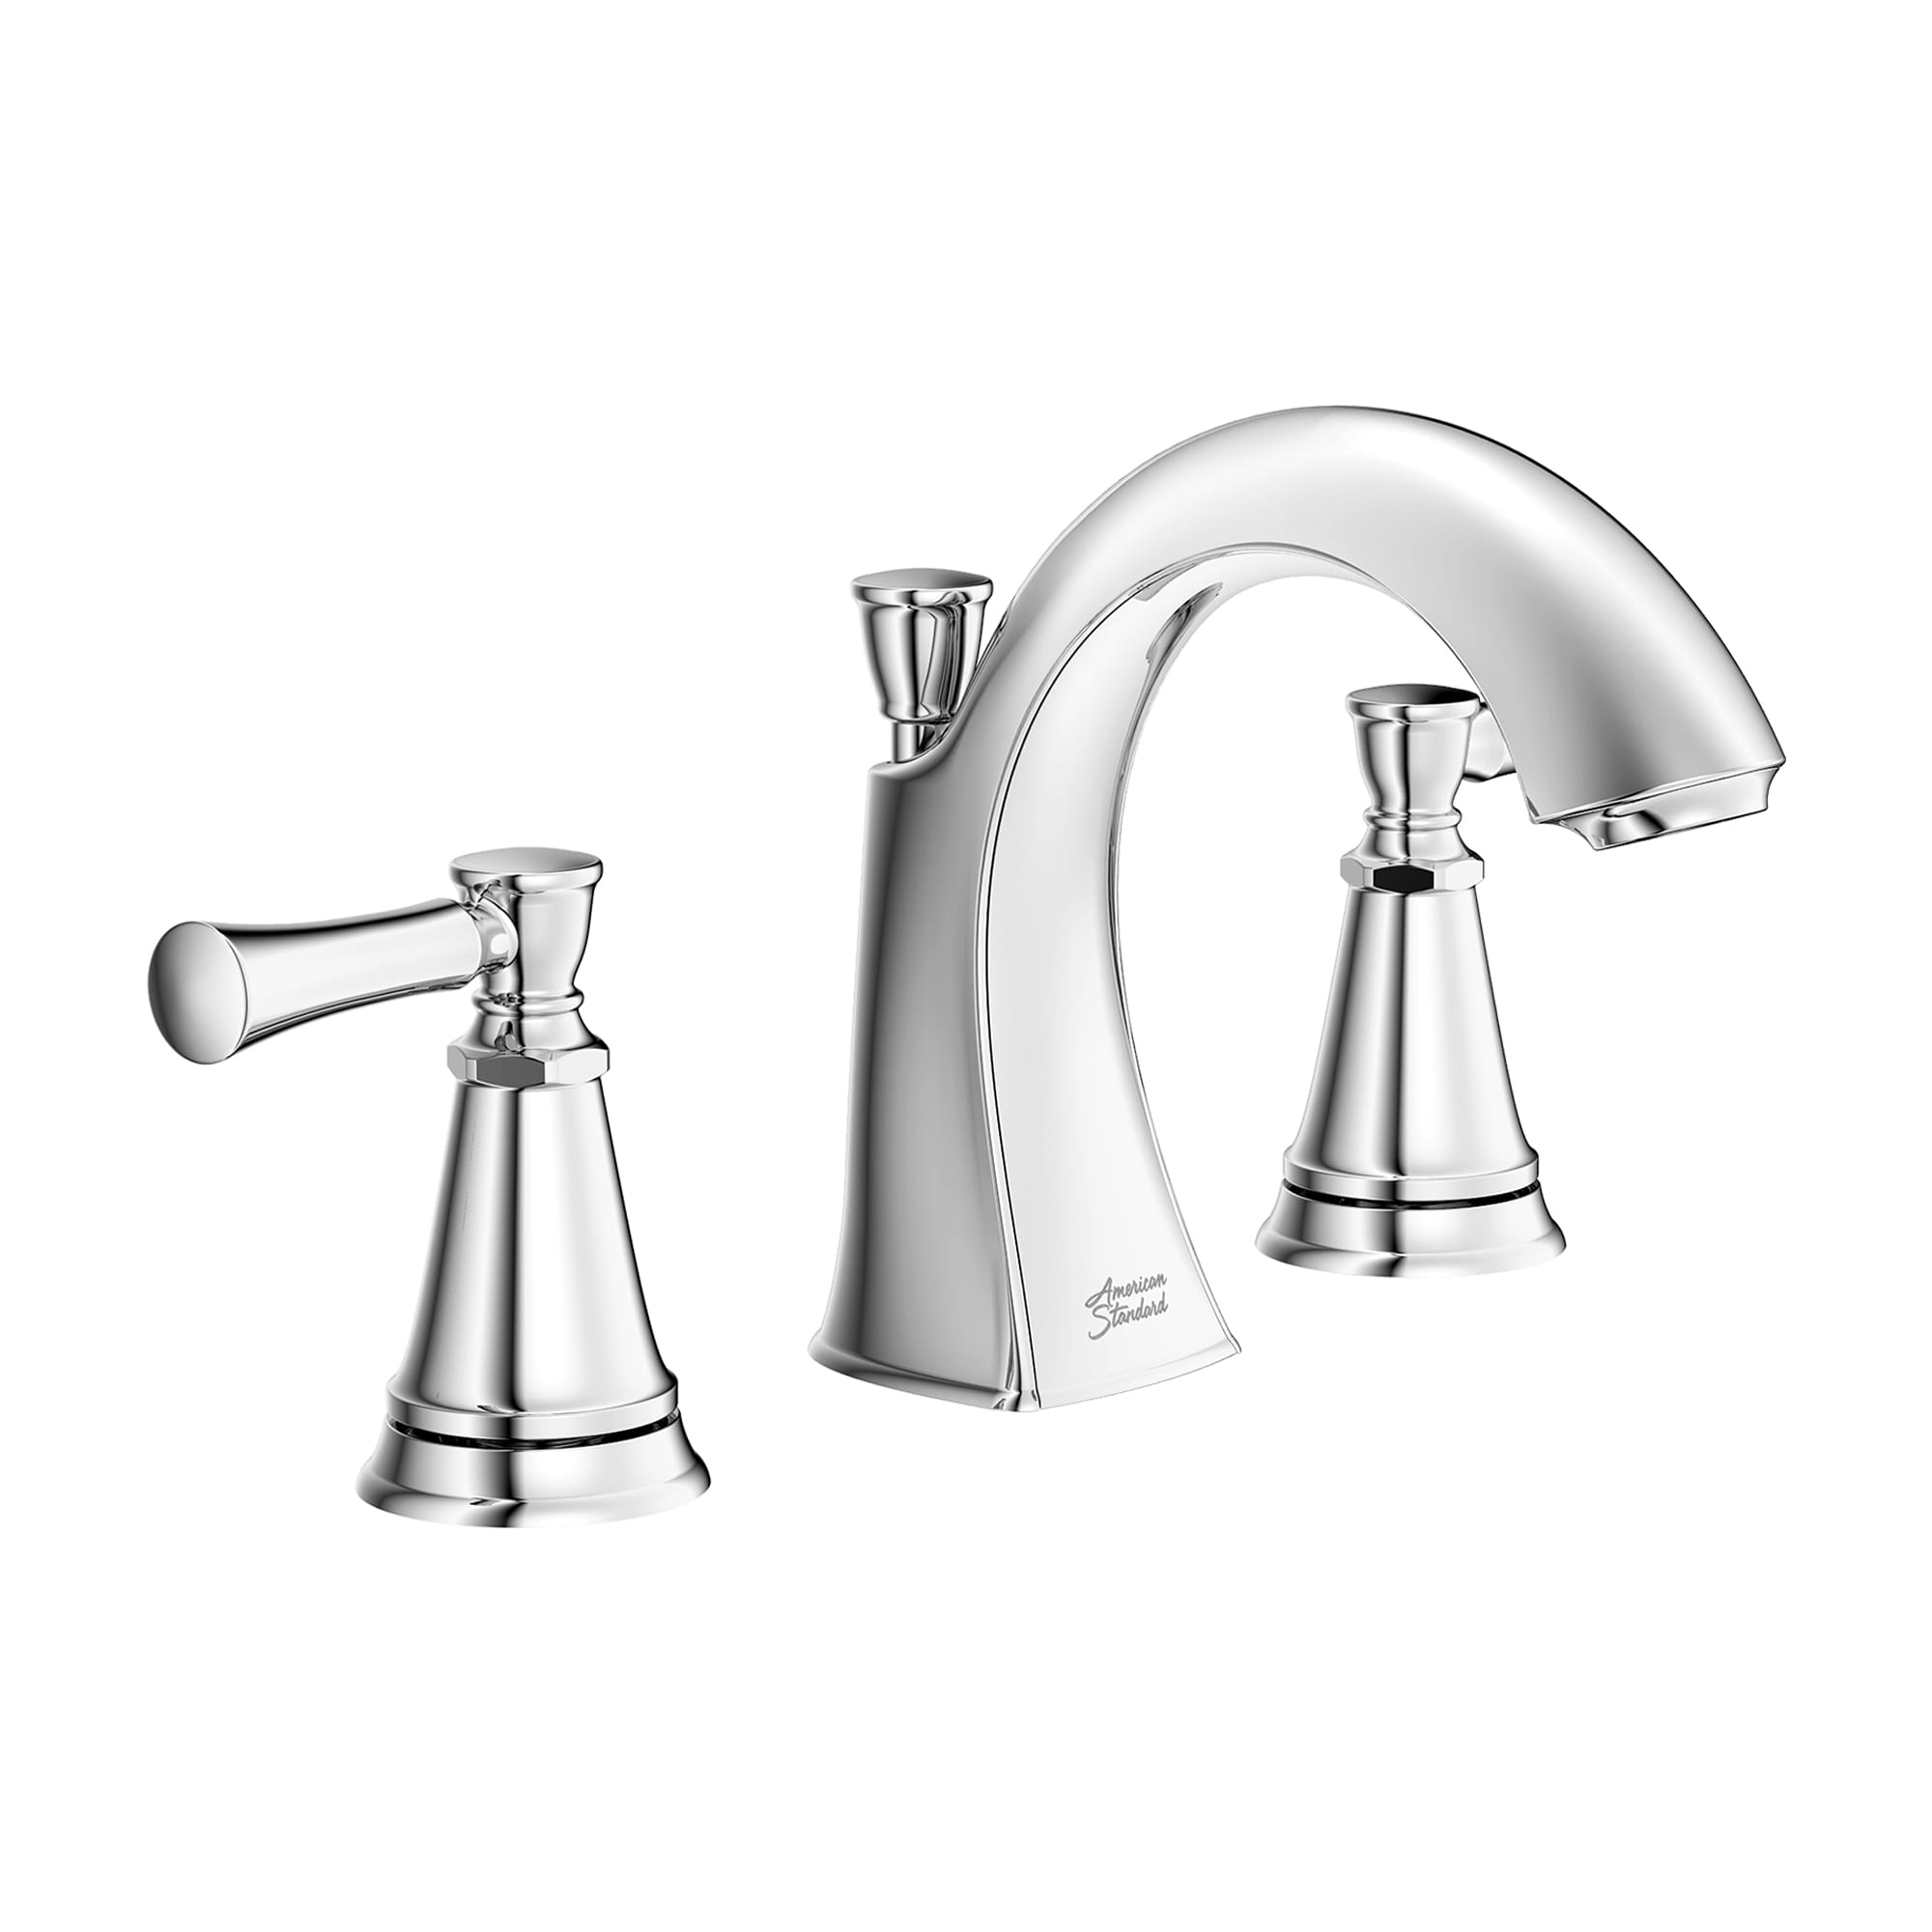 Chancellor 8-In. Widespread 2-Handle Bathroom Faucet, 1.2 GPM with Lever Handles